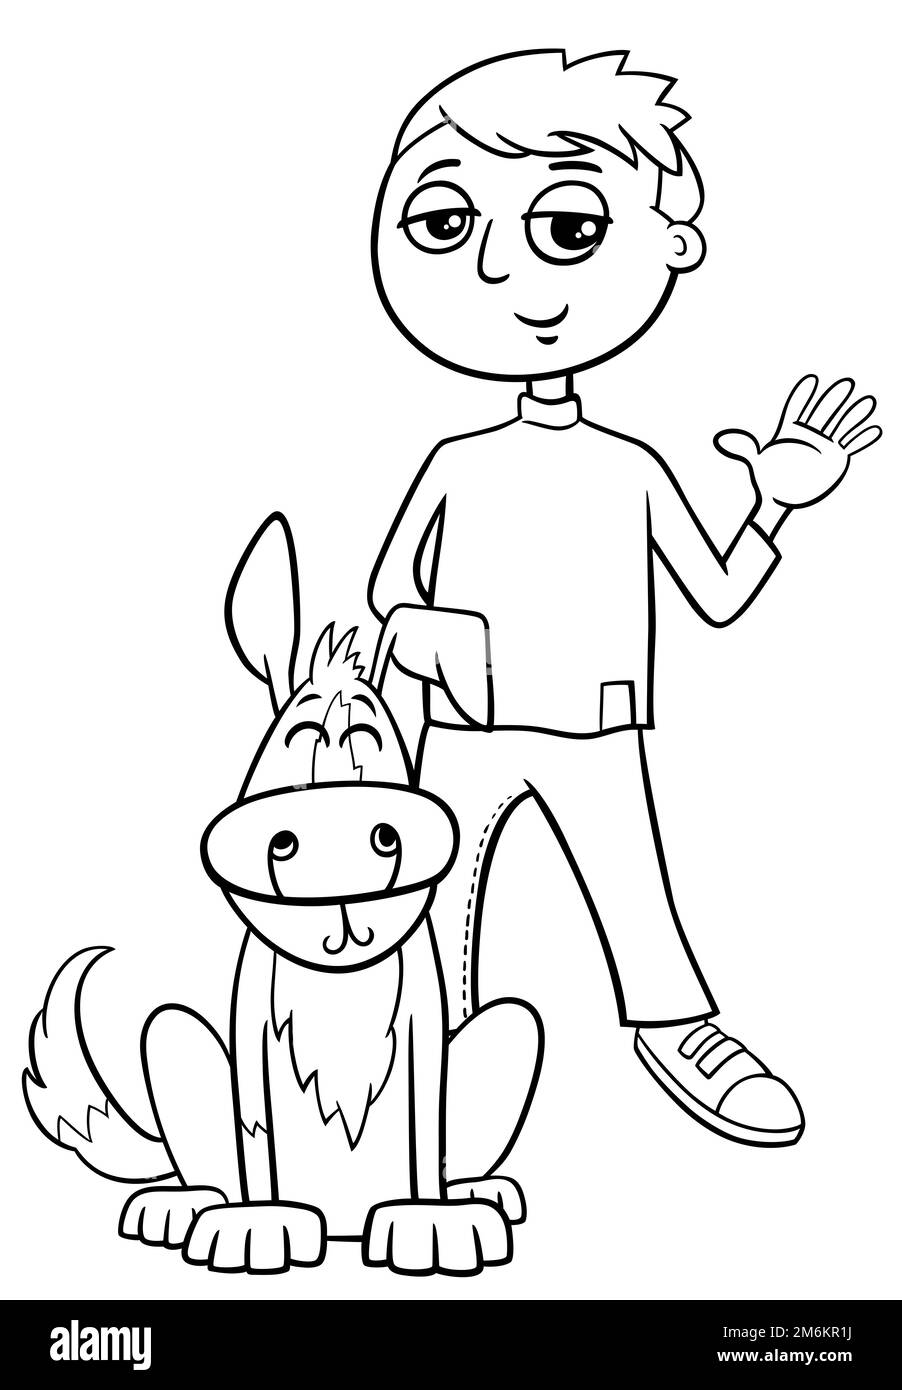 Cartoon teen boy character with dog coloring page Stock Photo